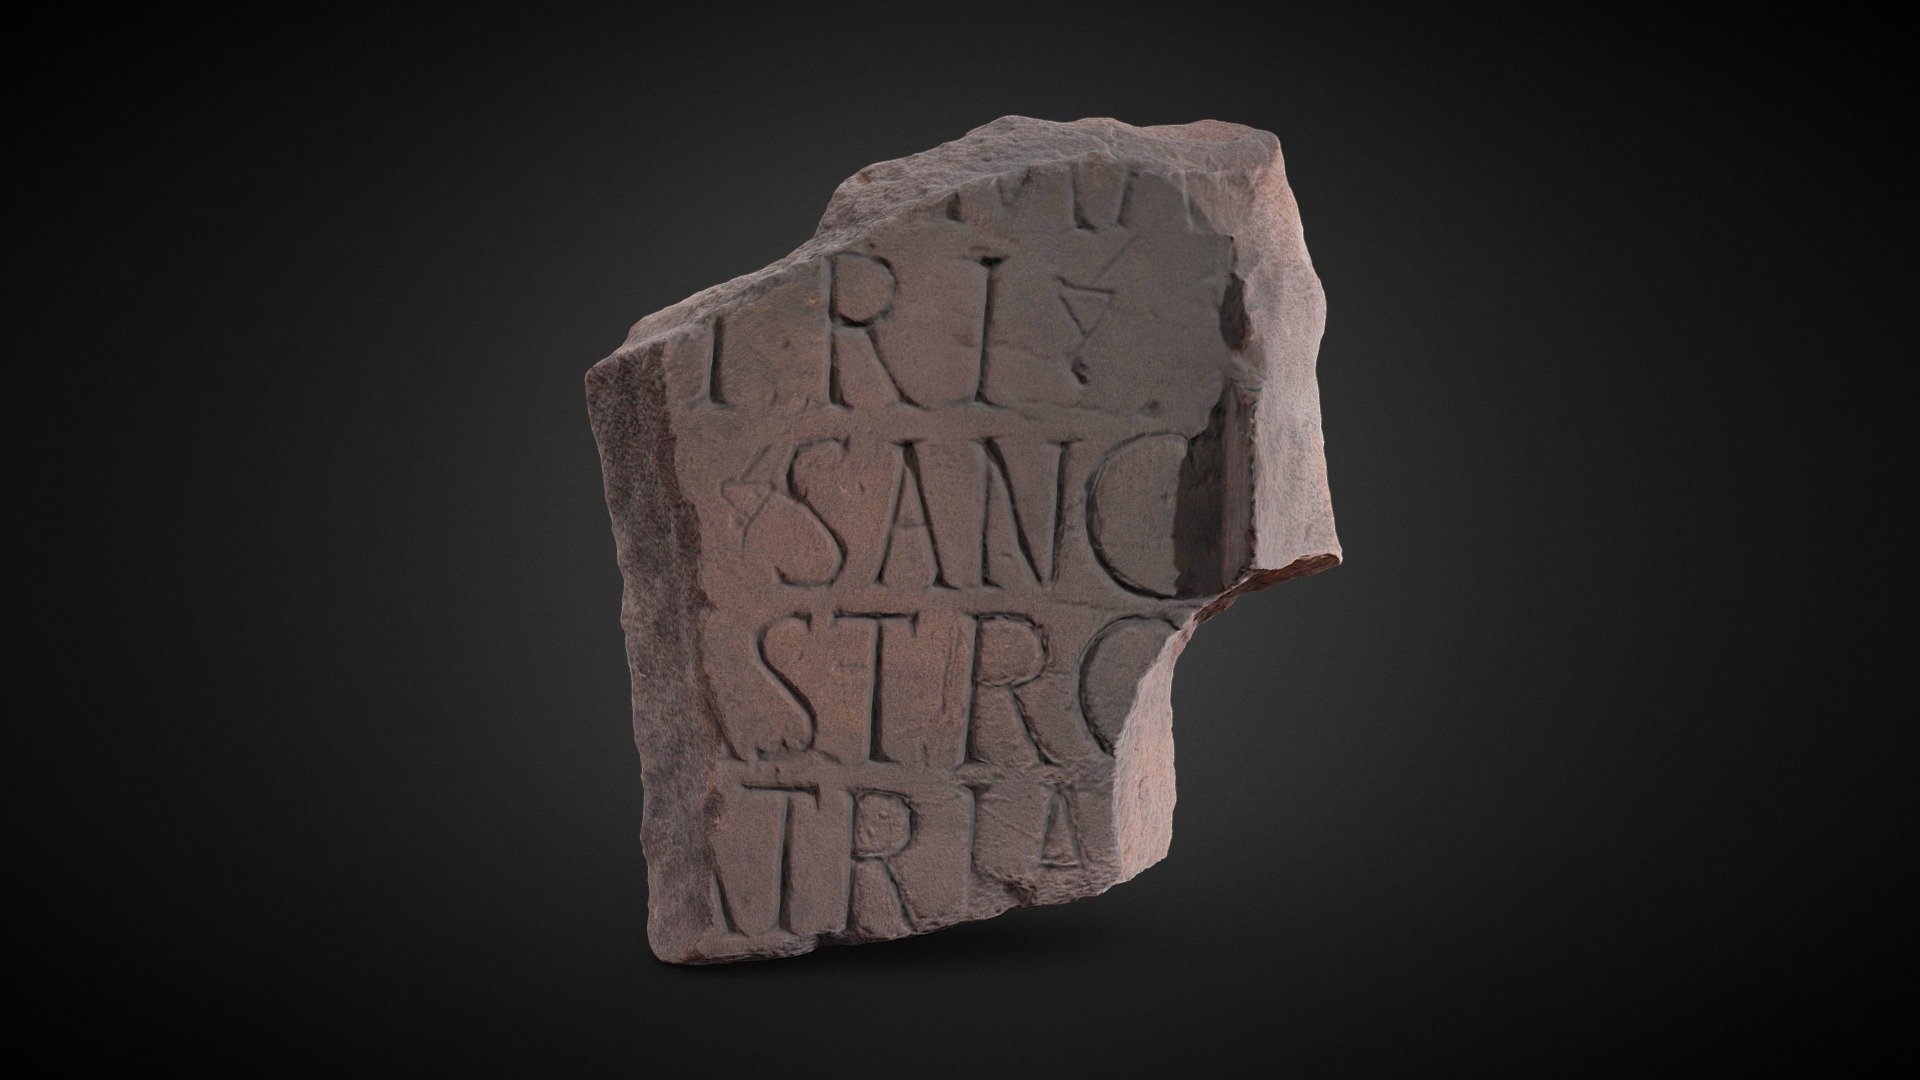 Stone inscribed with Latin from the collection of the Carlisle Cricket Club to be curated by Tullie House Museum And Art Gallery. The stone was found during a recent excavation at Carlisle Cricket Club, you can read more about that project here.

Photography Credit: Lawrence Key

Model Credit: Ardern Hulme-Beaman, Charlotte Sargent

Produced as part of the Museums of the North West Photogrammetry Hub: Building Virtual 3D Futures project. Learn more  here 3d model